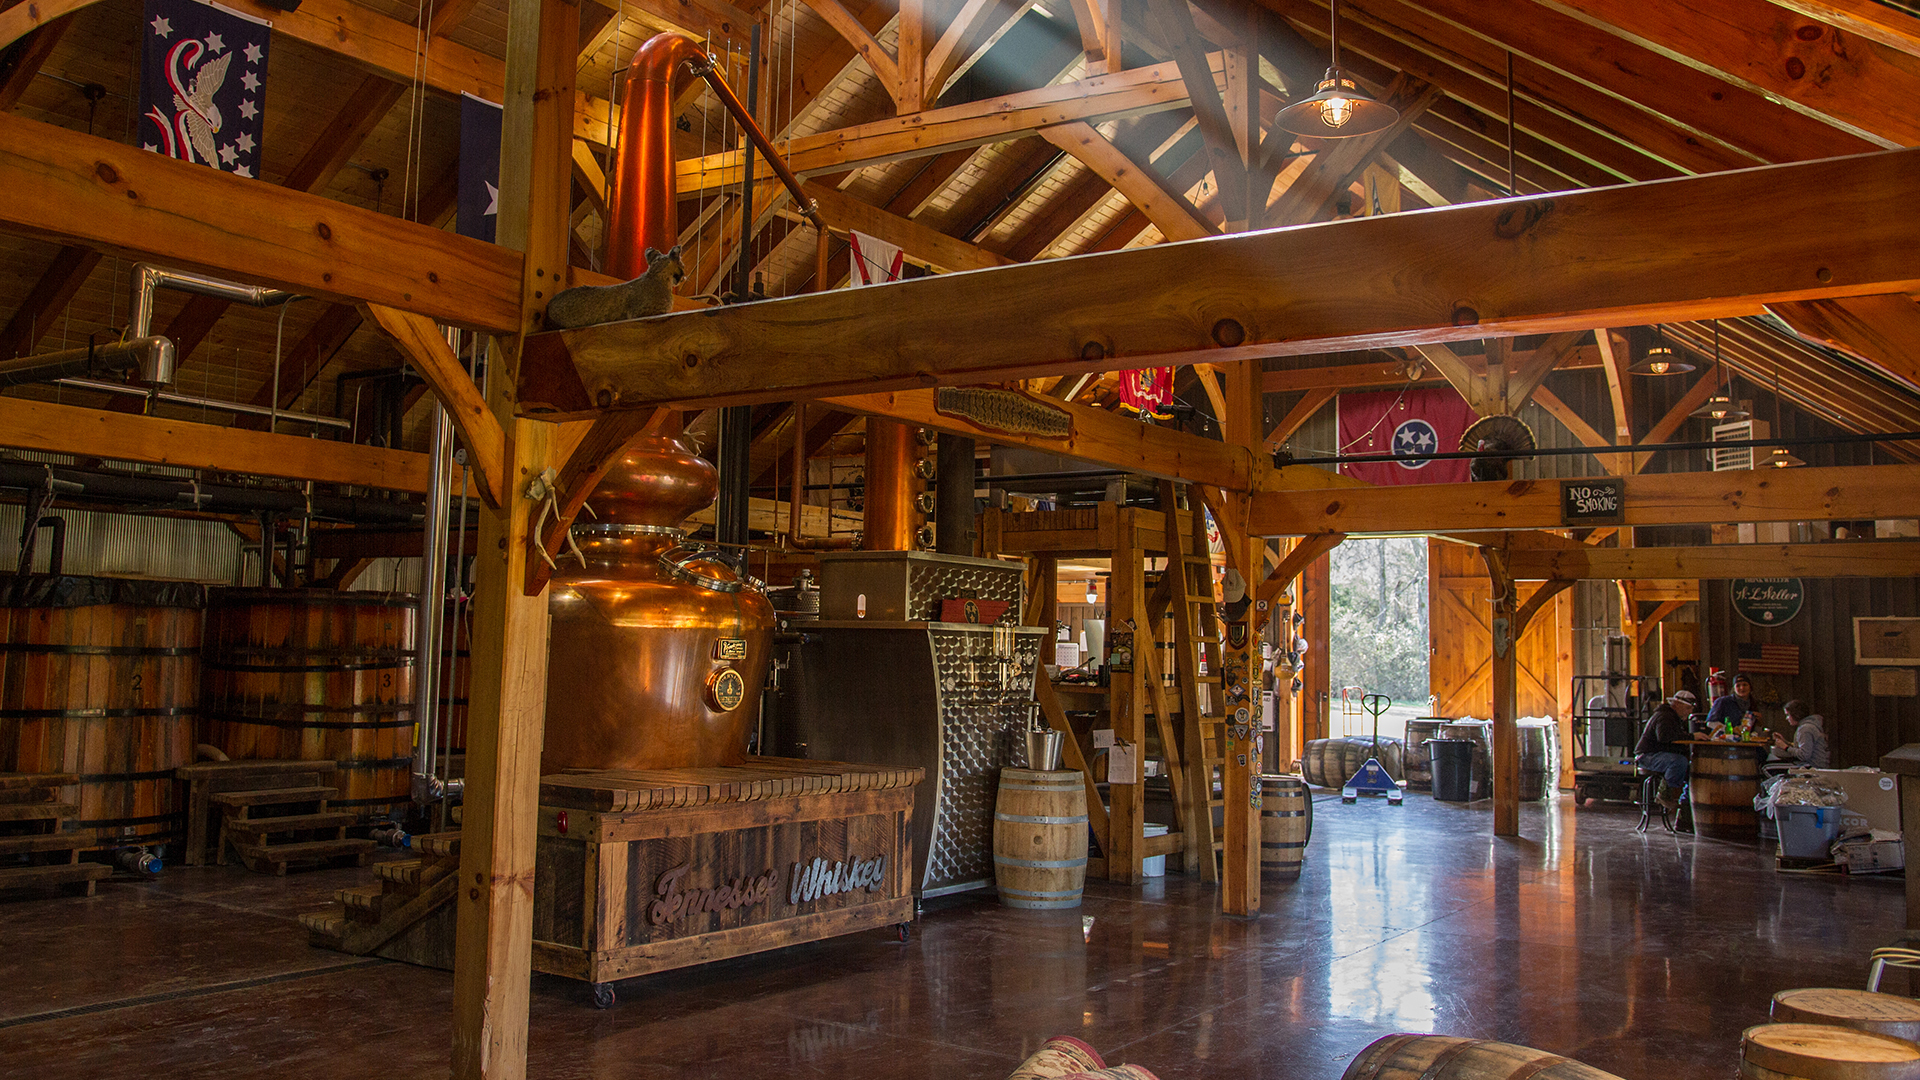 Inside a barn structure with whisky distillery equipment